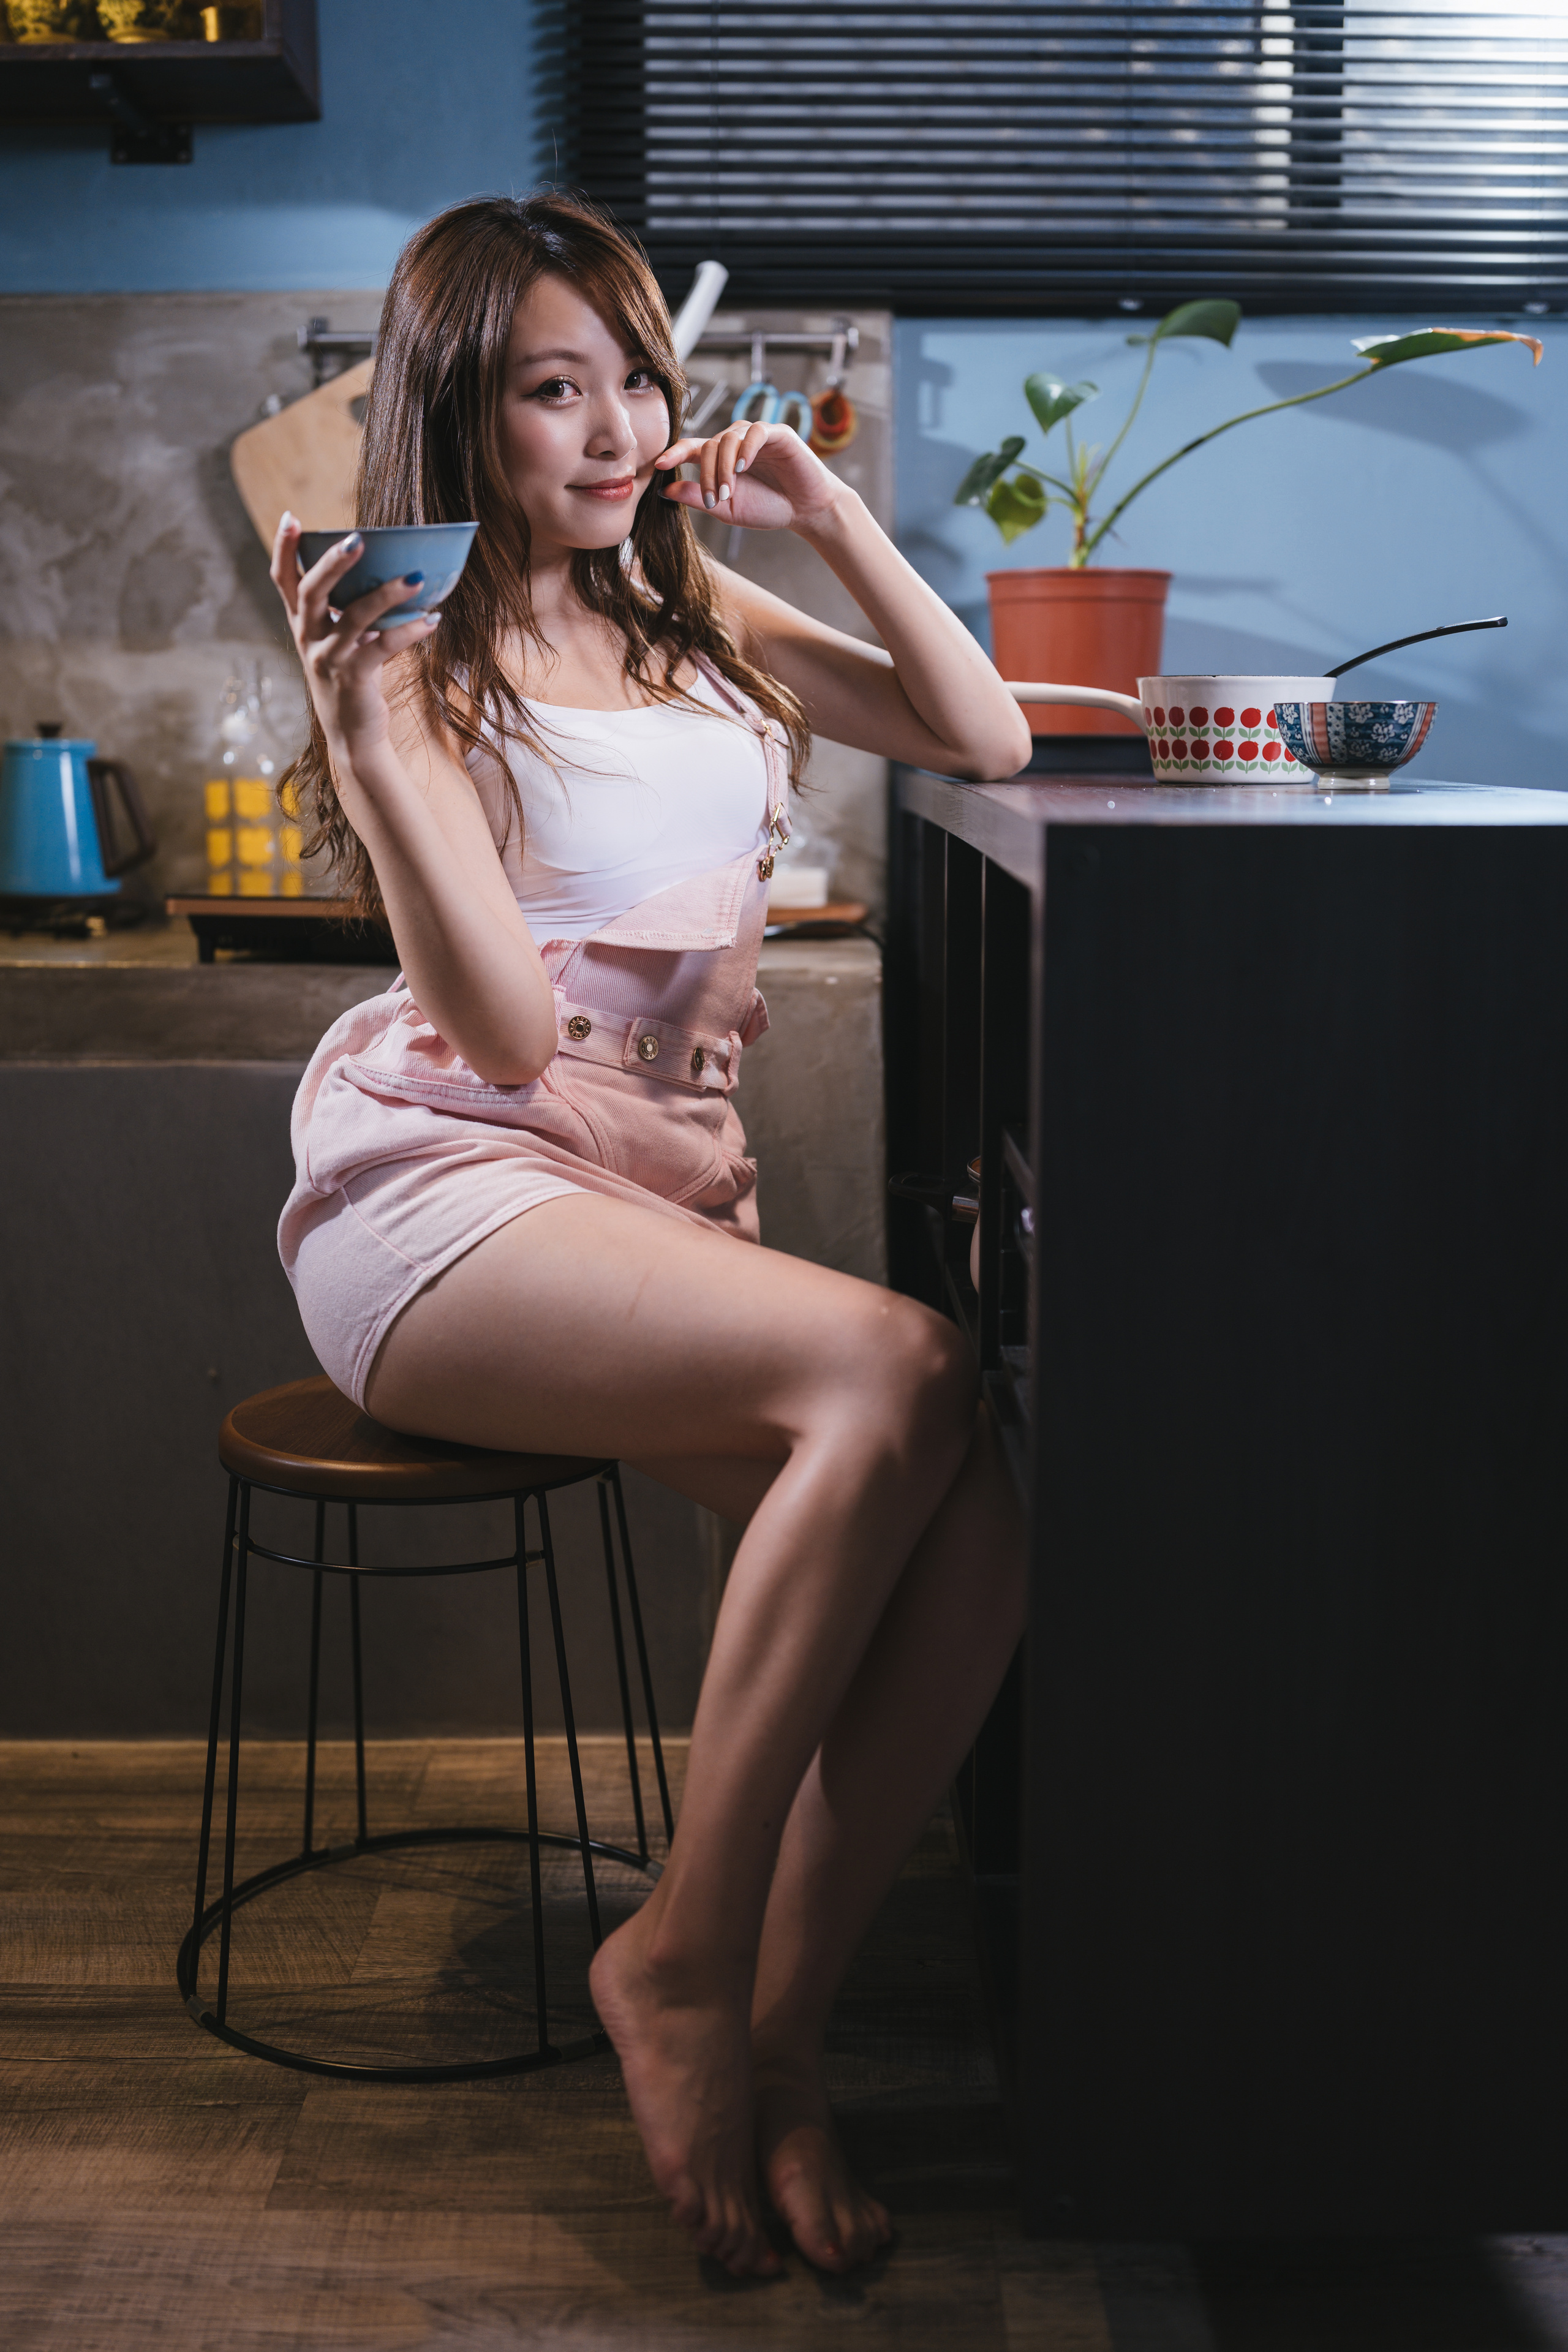 People 2560x3840 Asian model women long hair dark hair depth of field chair sitting table cup flowerpot plants kitchen pink shorts white tops barefoot portrait display